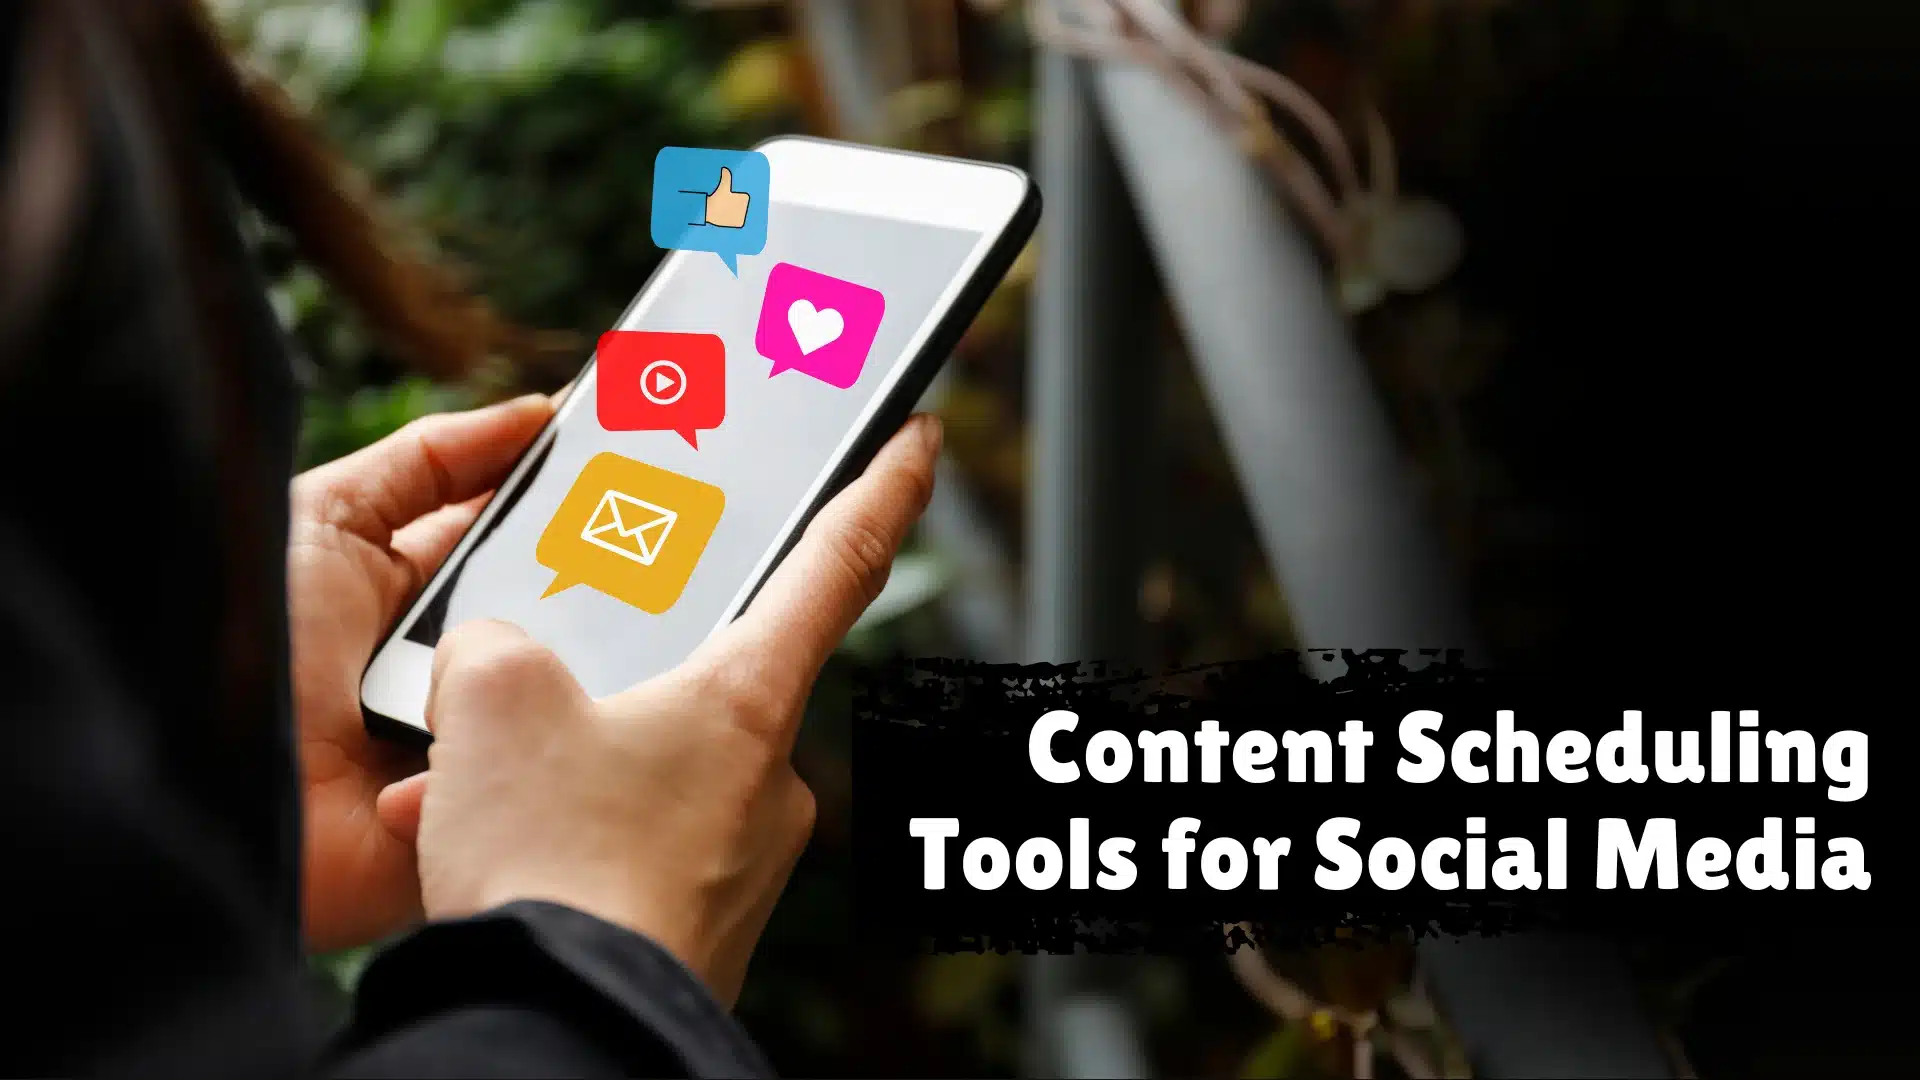 Content Scheduling Tools for Social Media